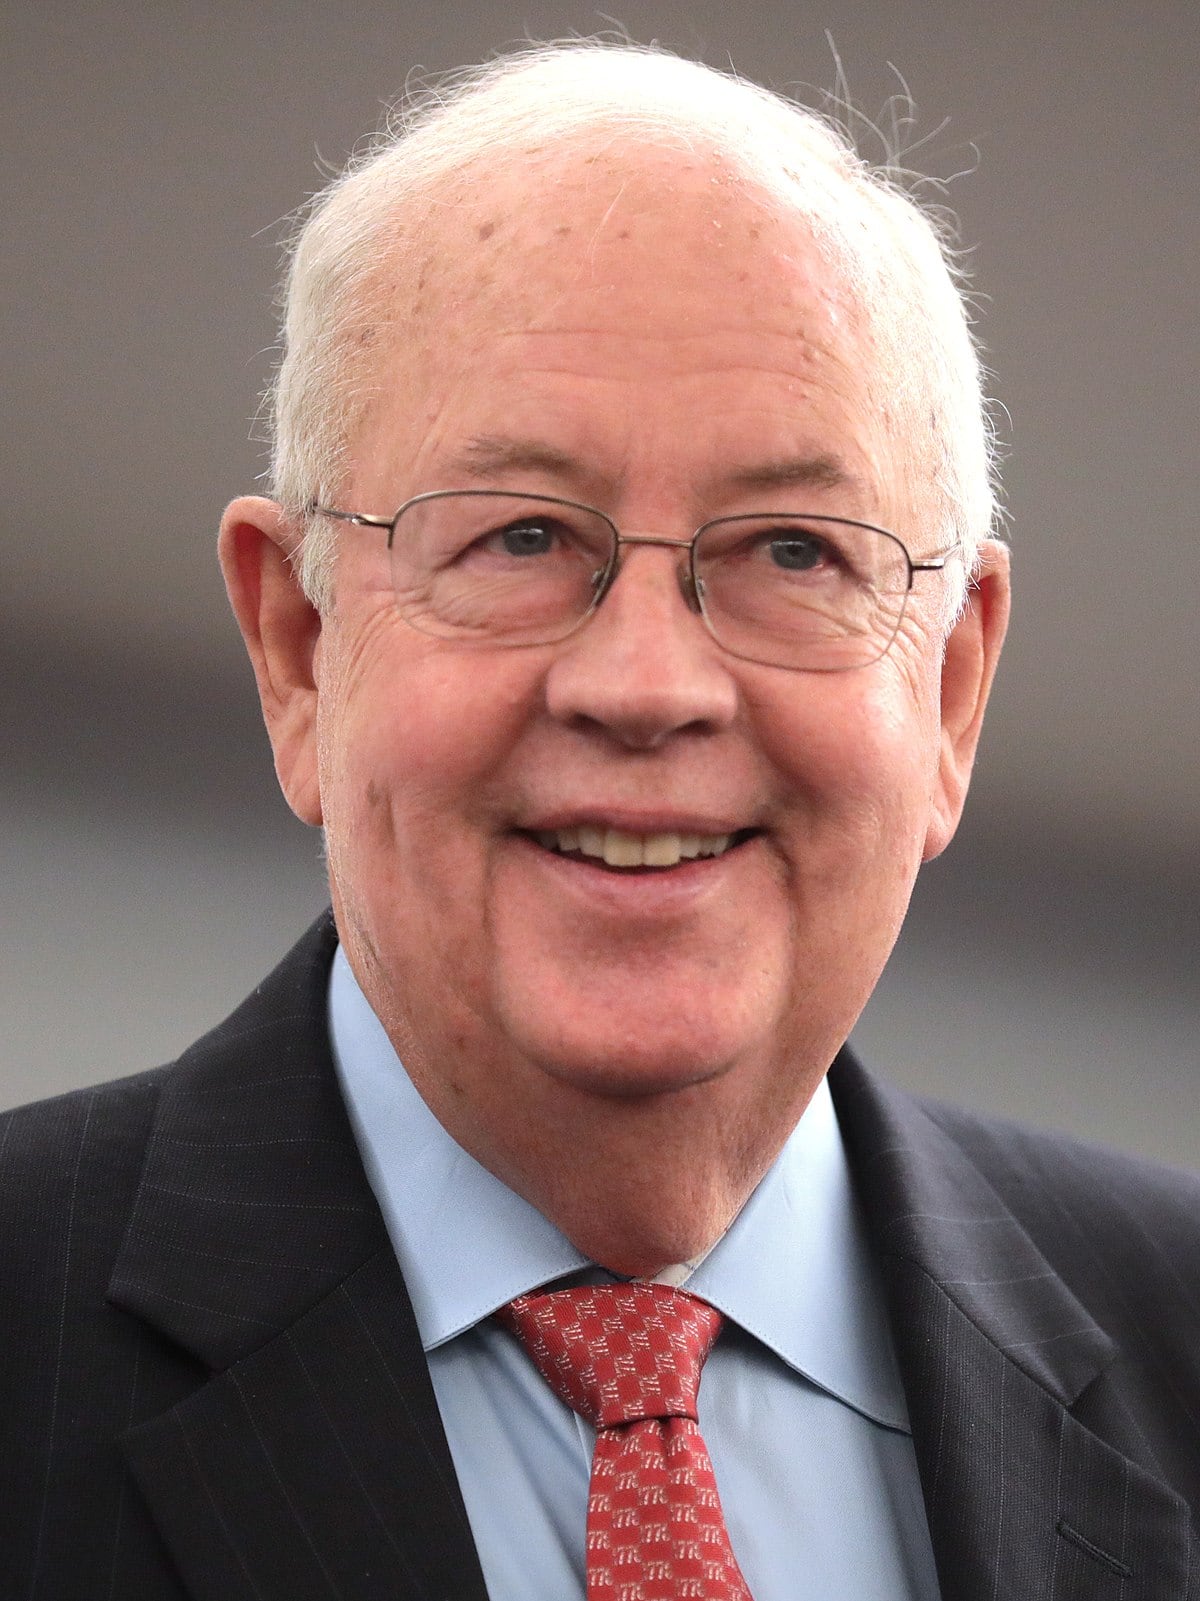 Kenneth Starr to be guest speaker